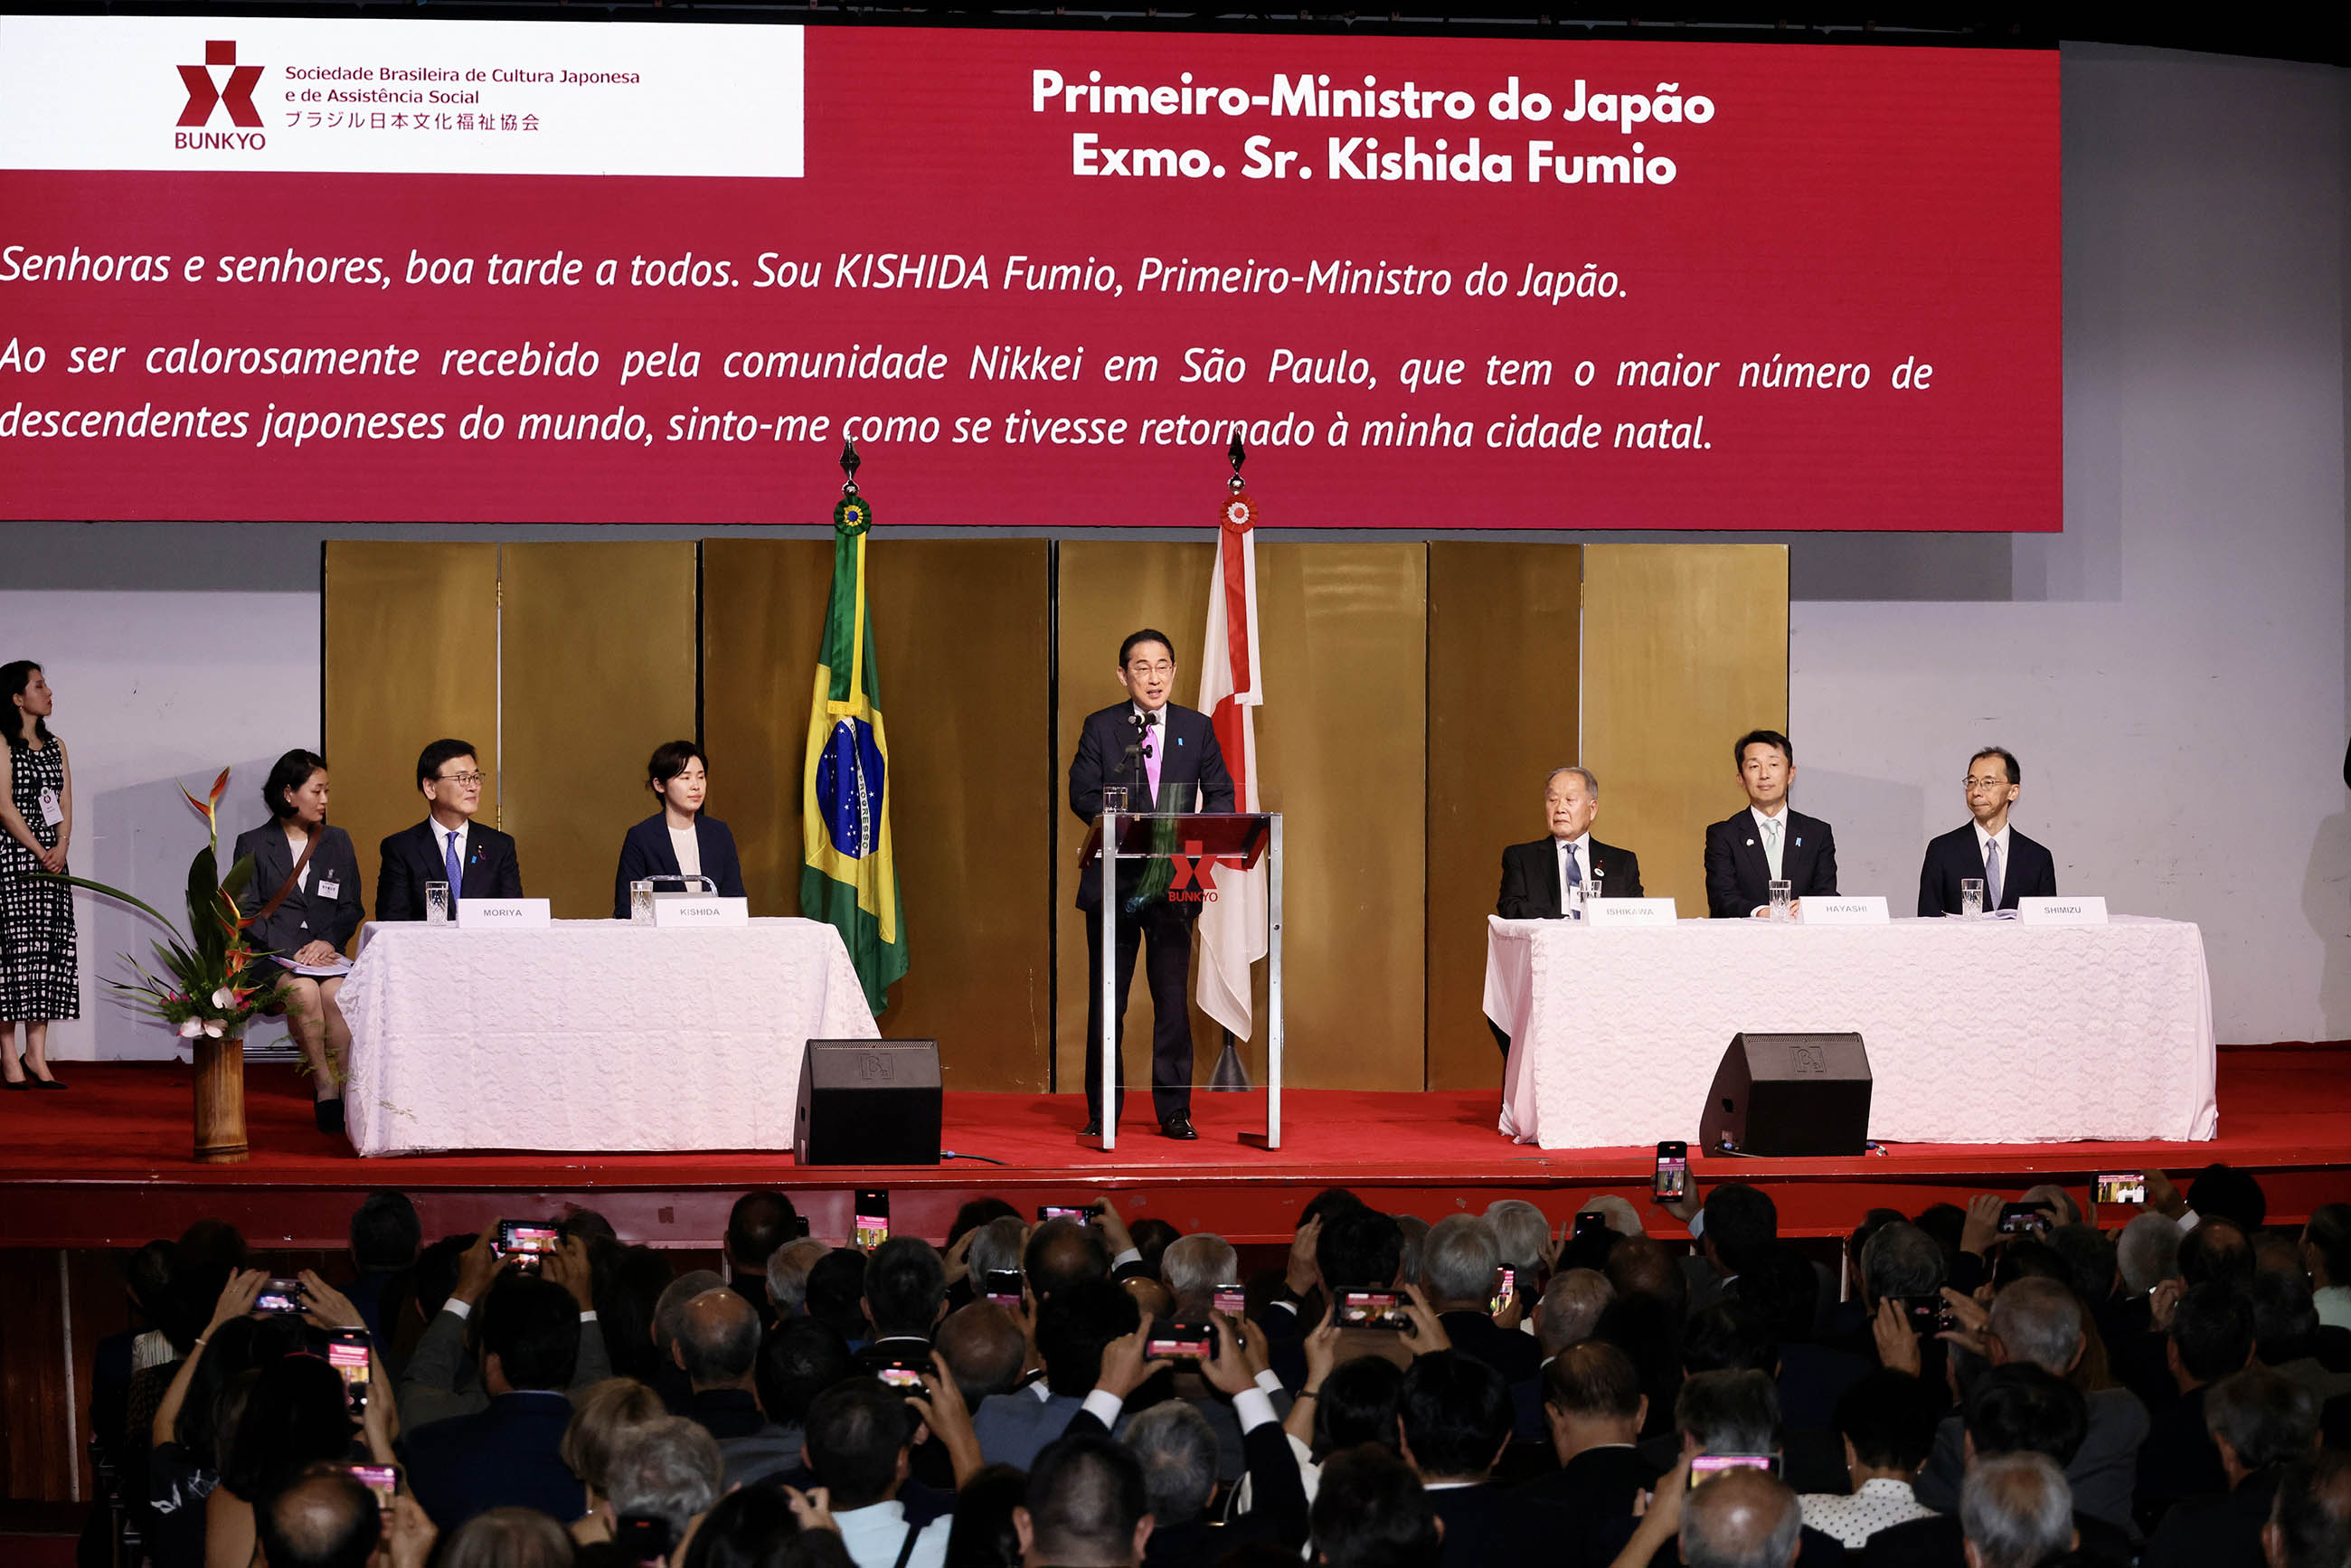 Prime Minister Kishida attending a welcome ceremony hosted by Nikkei communities (3)